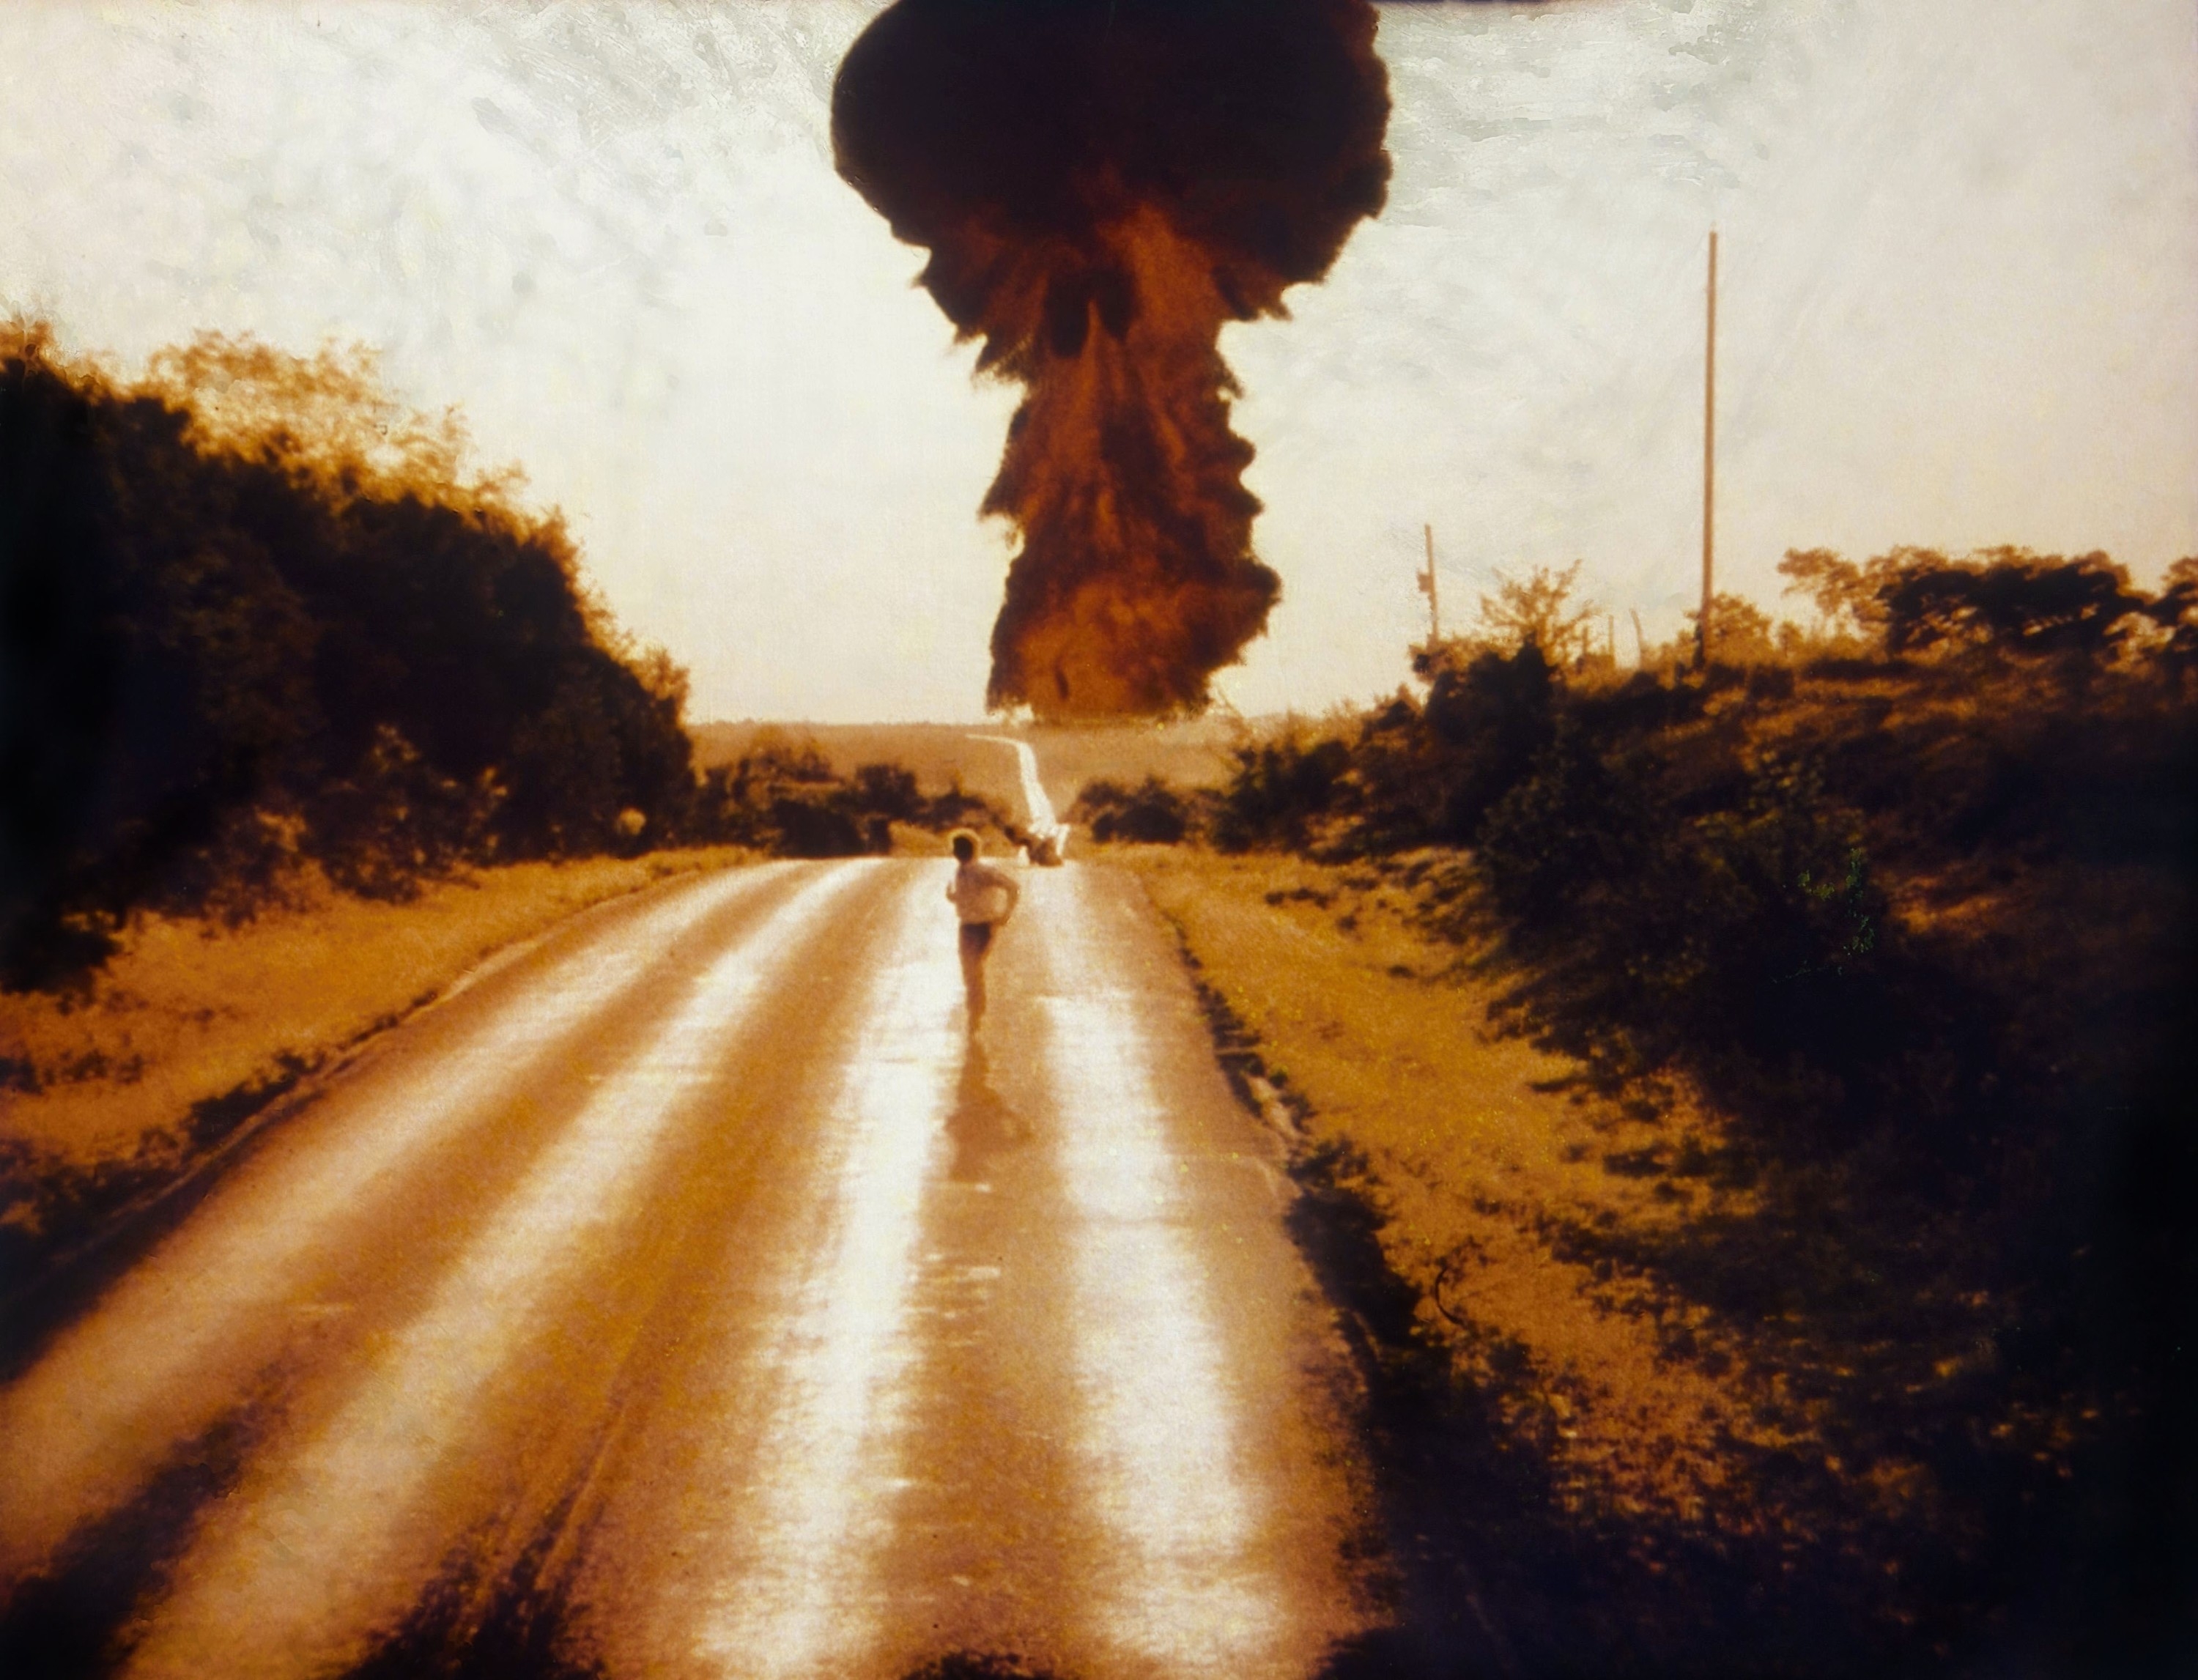 Historic photo of a large mushroom cloud in the distance viewed from a long road